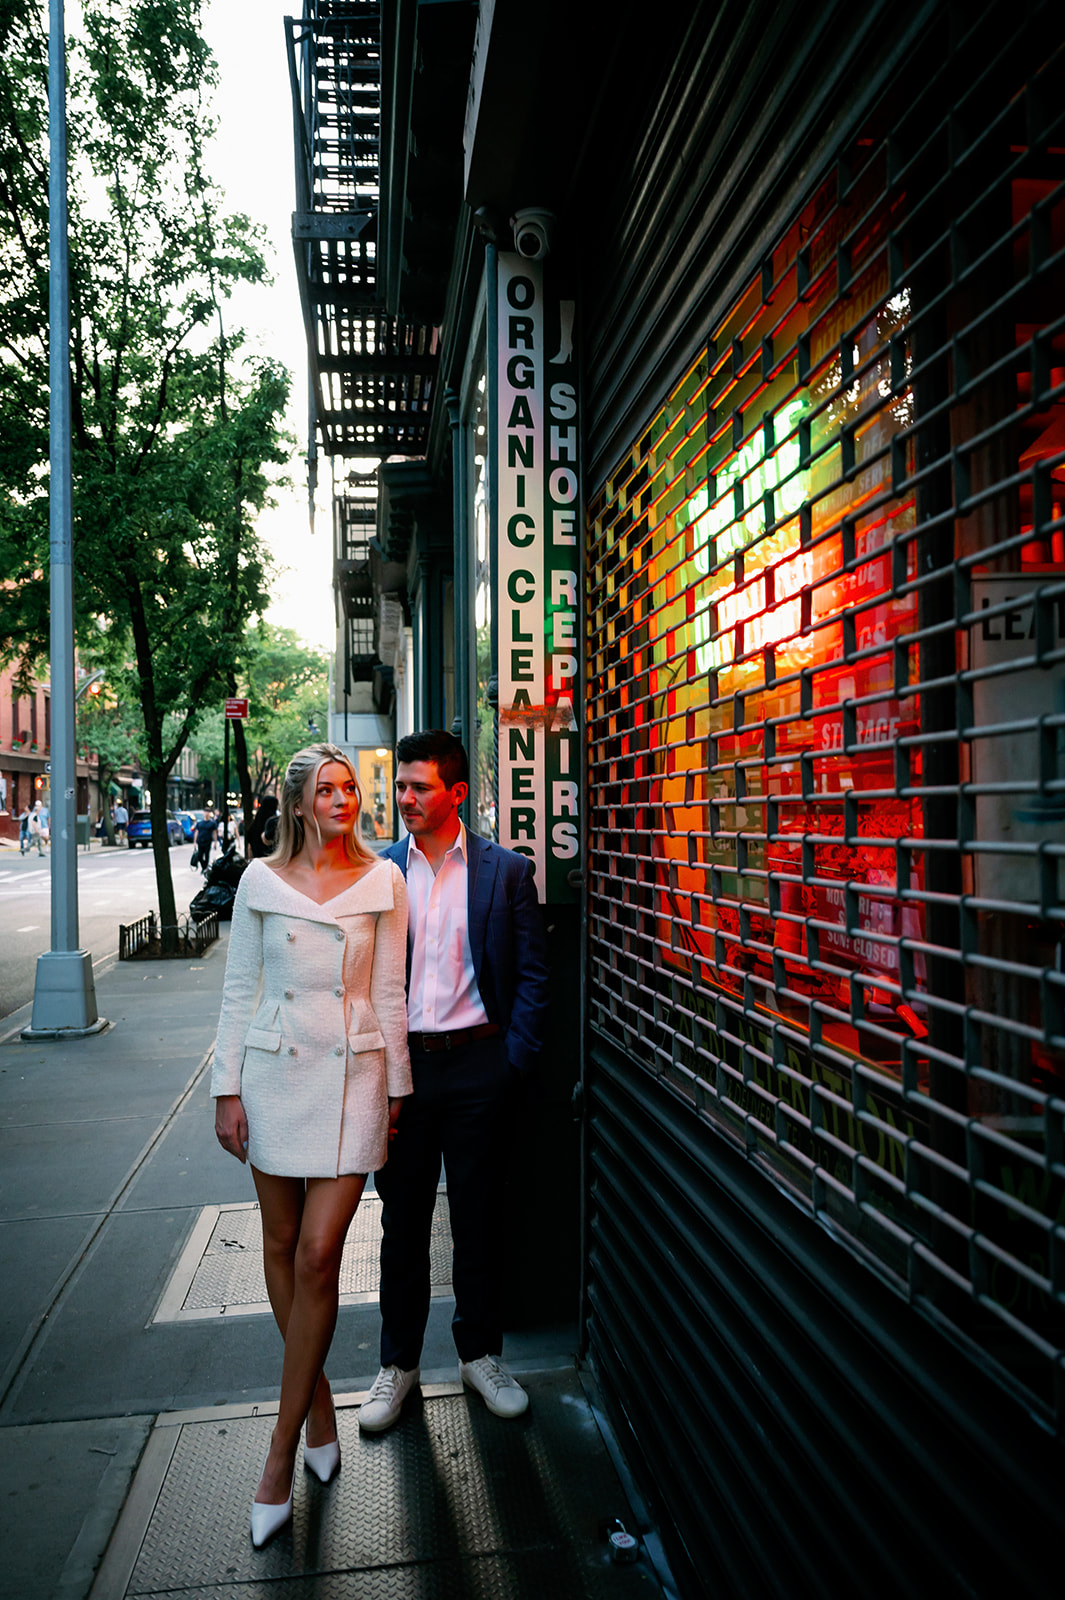 Neon sign artistic couples engagement photo session in NYC.